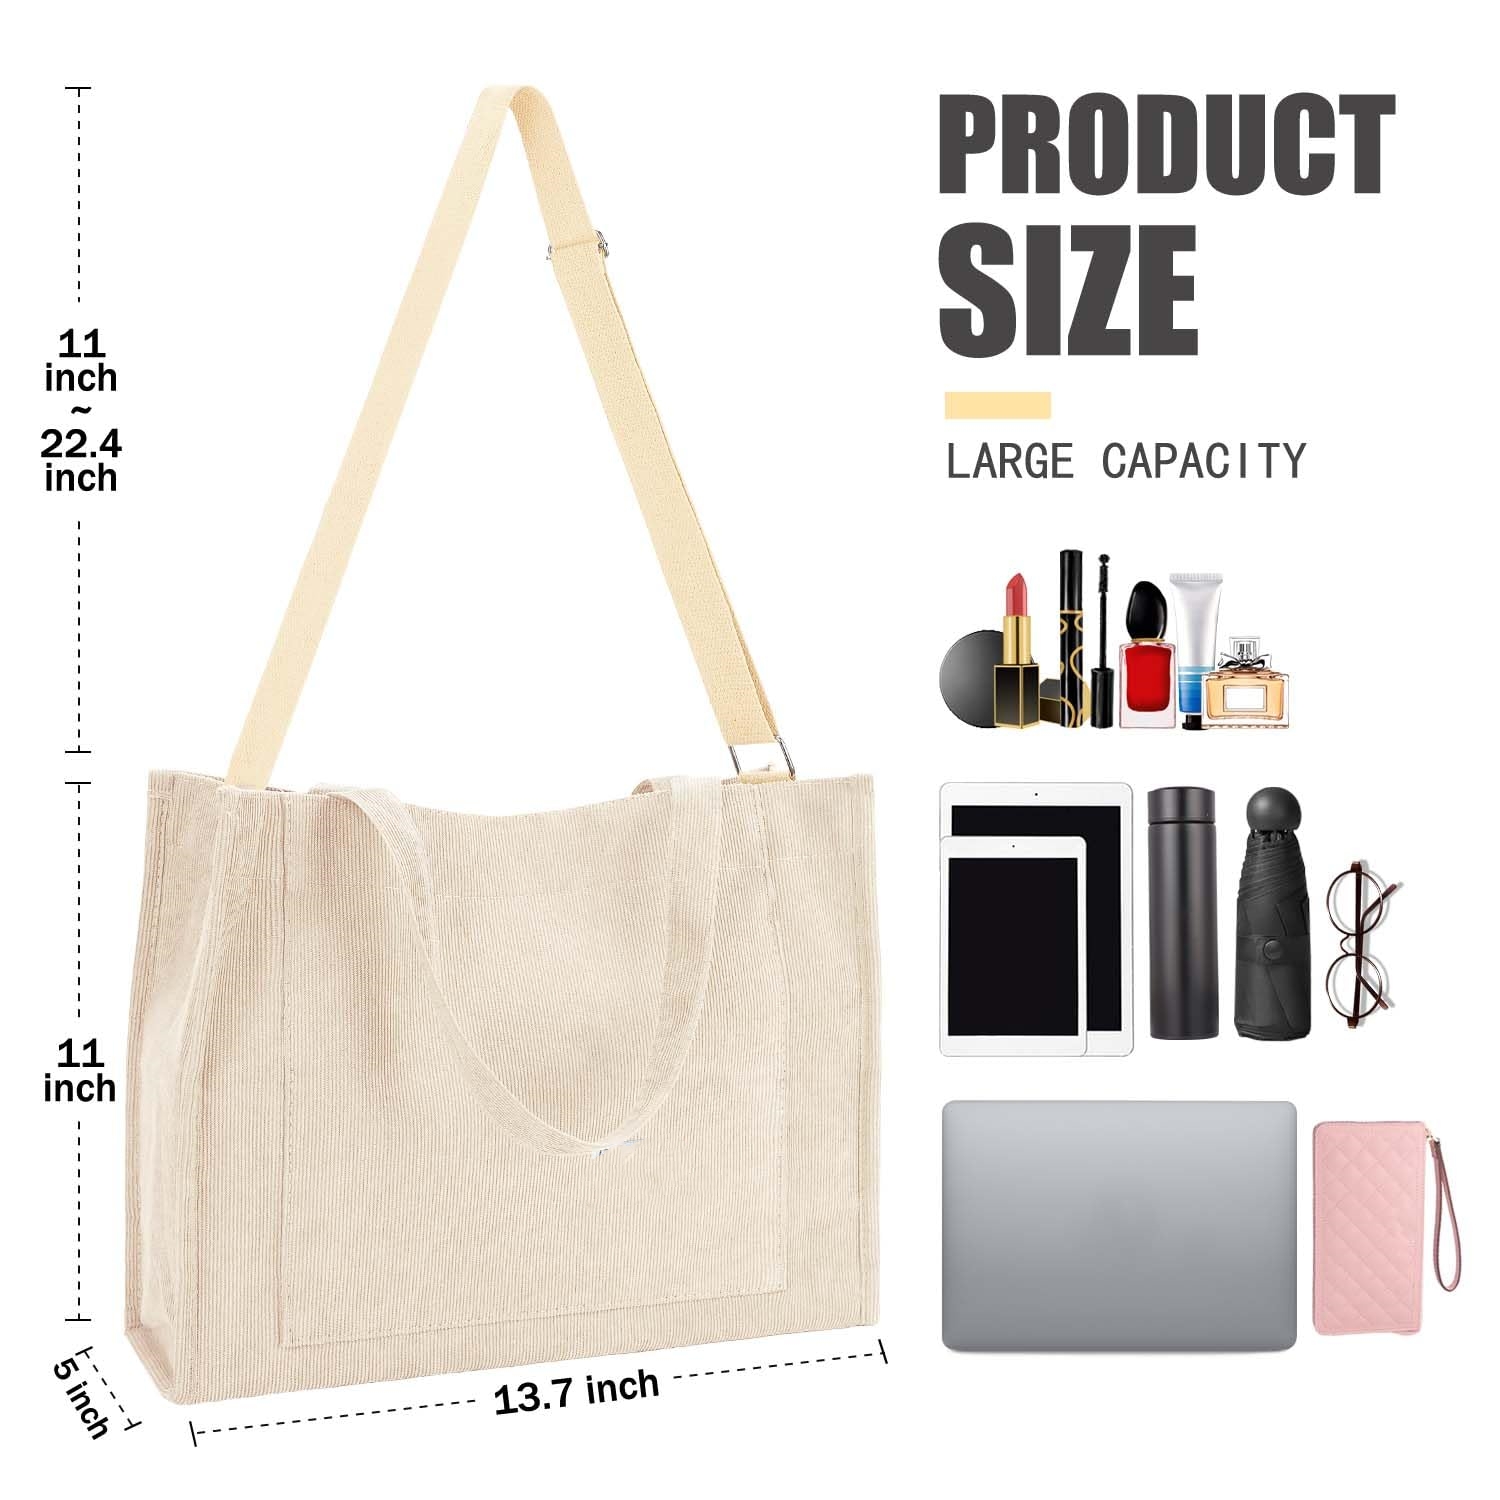 Small Corduroy Tote Bag Wholesale Product Details